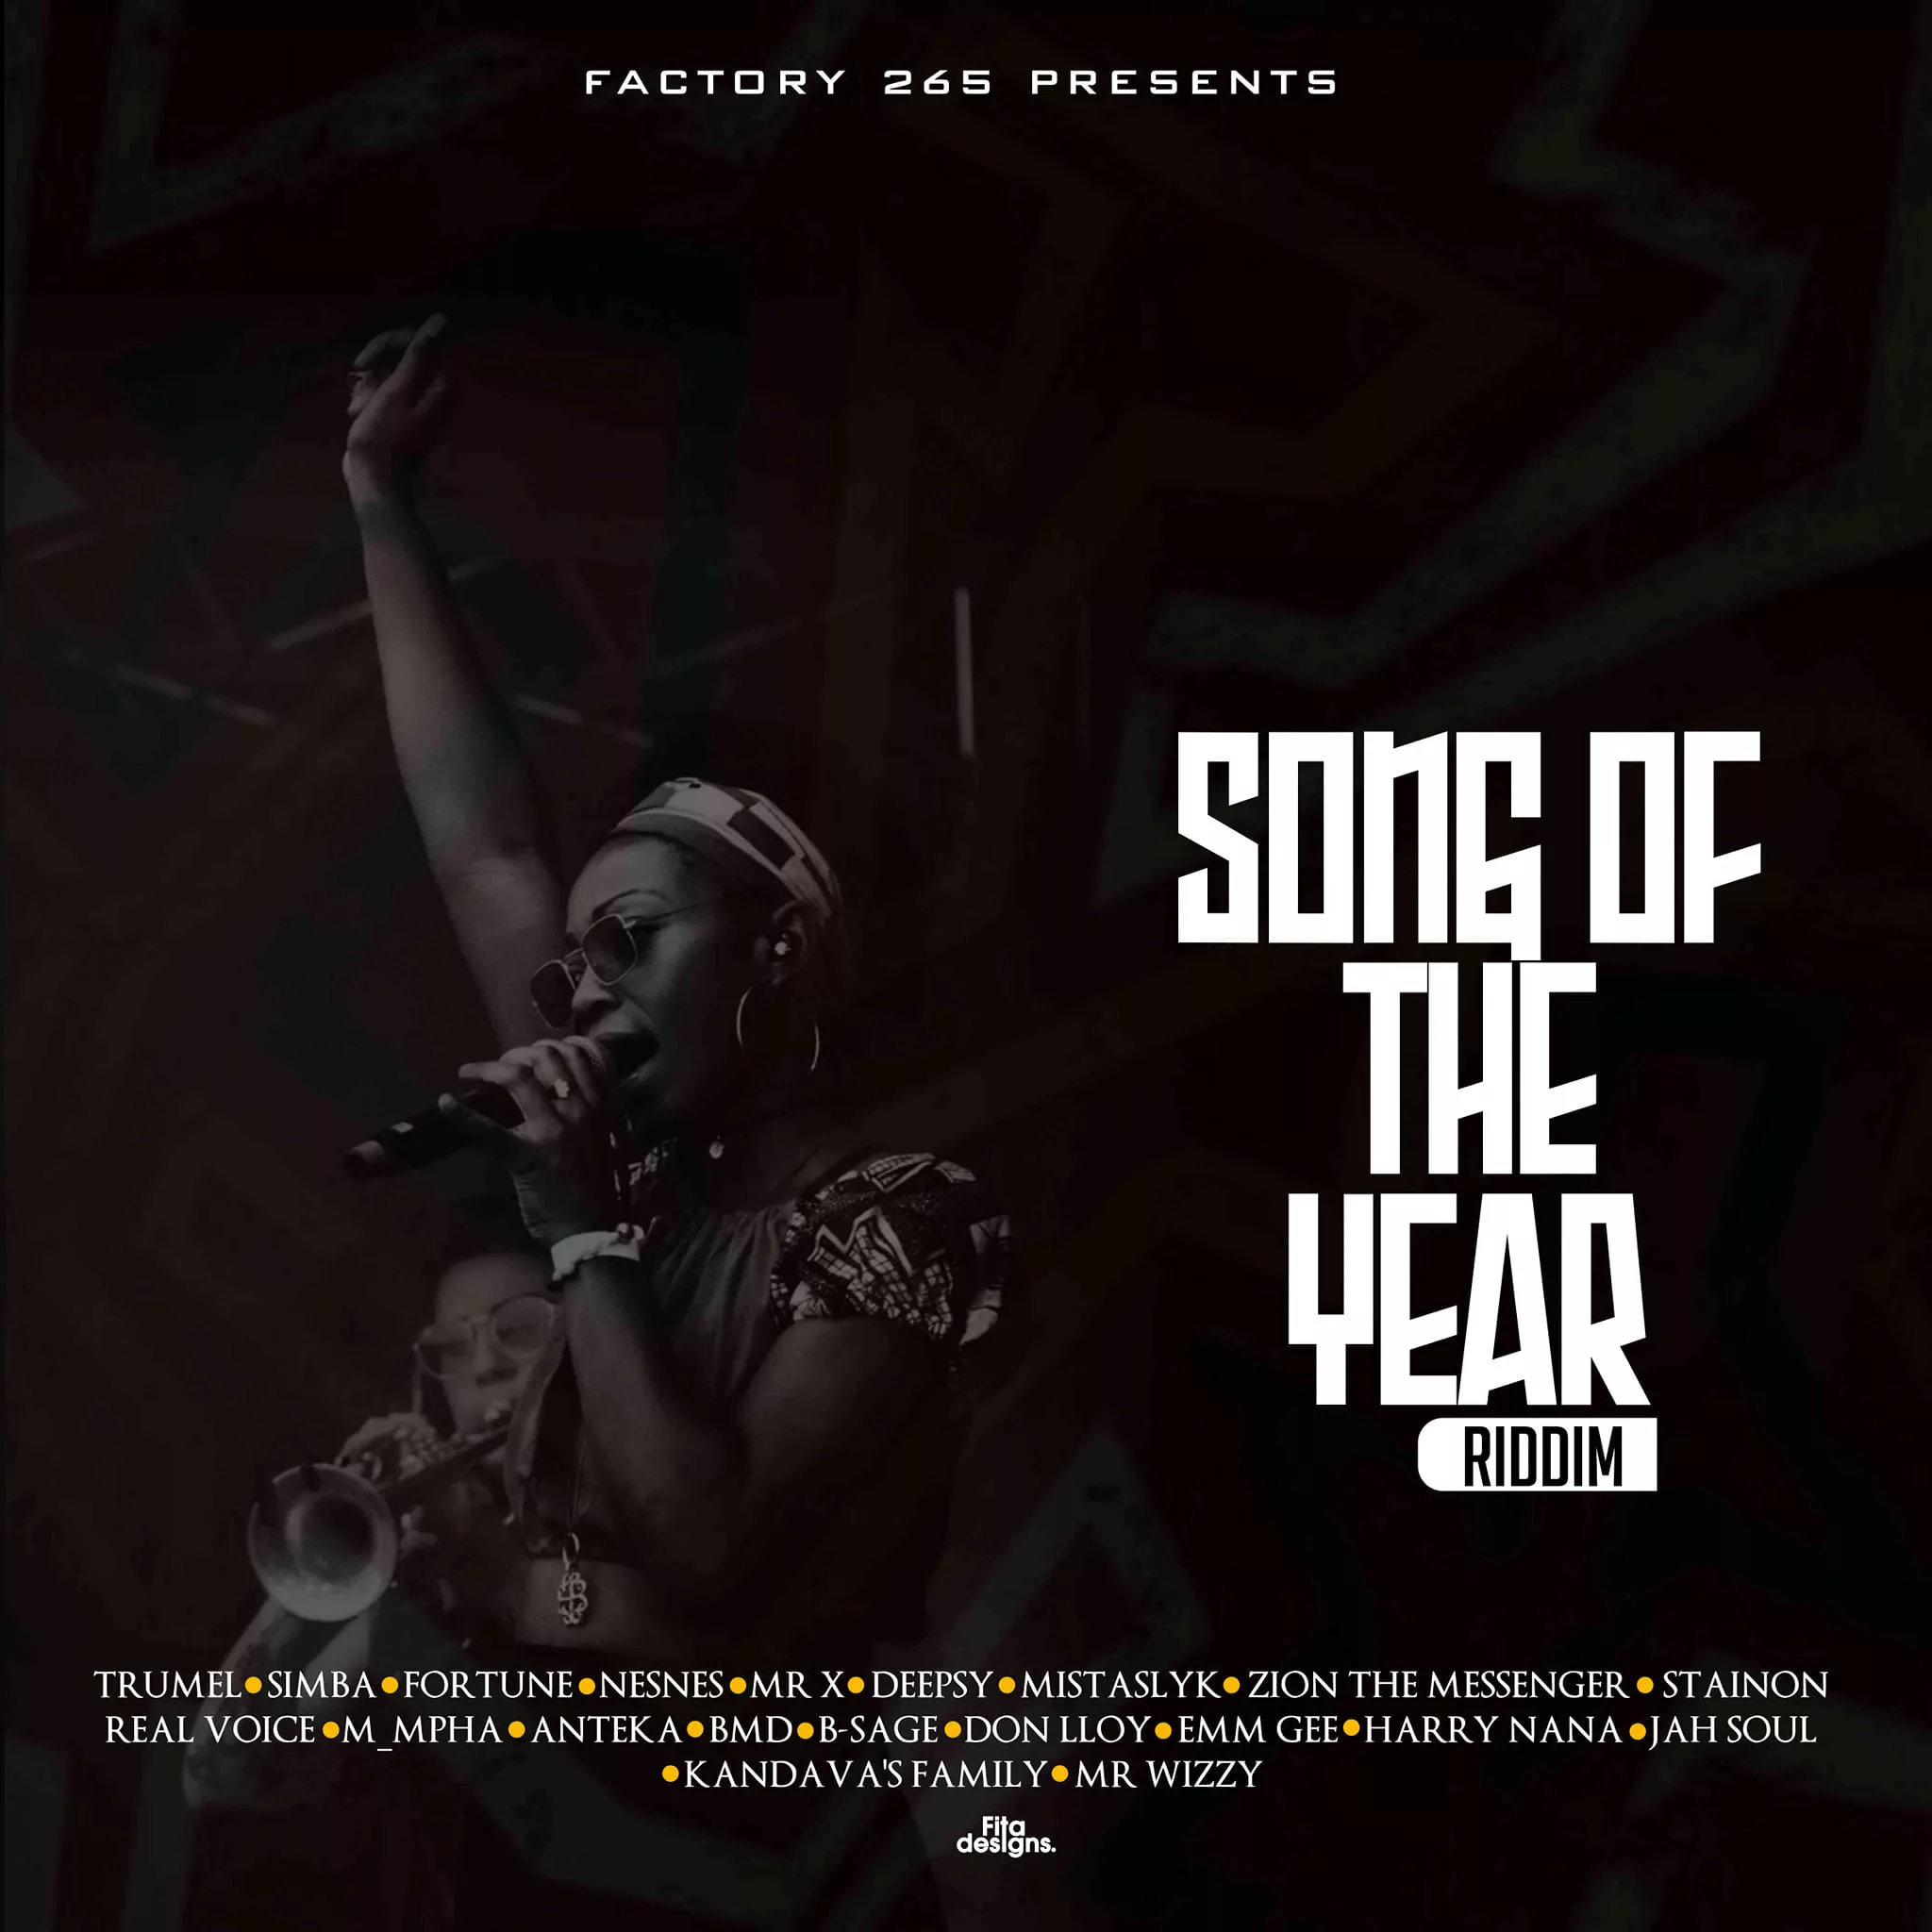 SONG OF THE YEAR RIDDIM” TO BE OUT SOON!